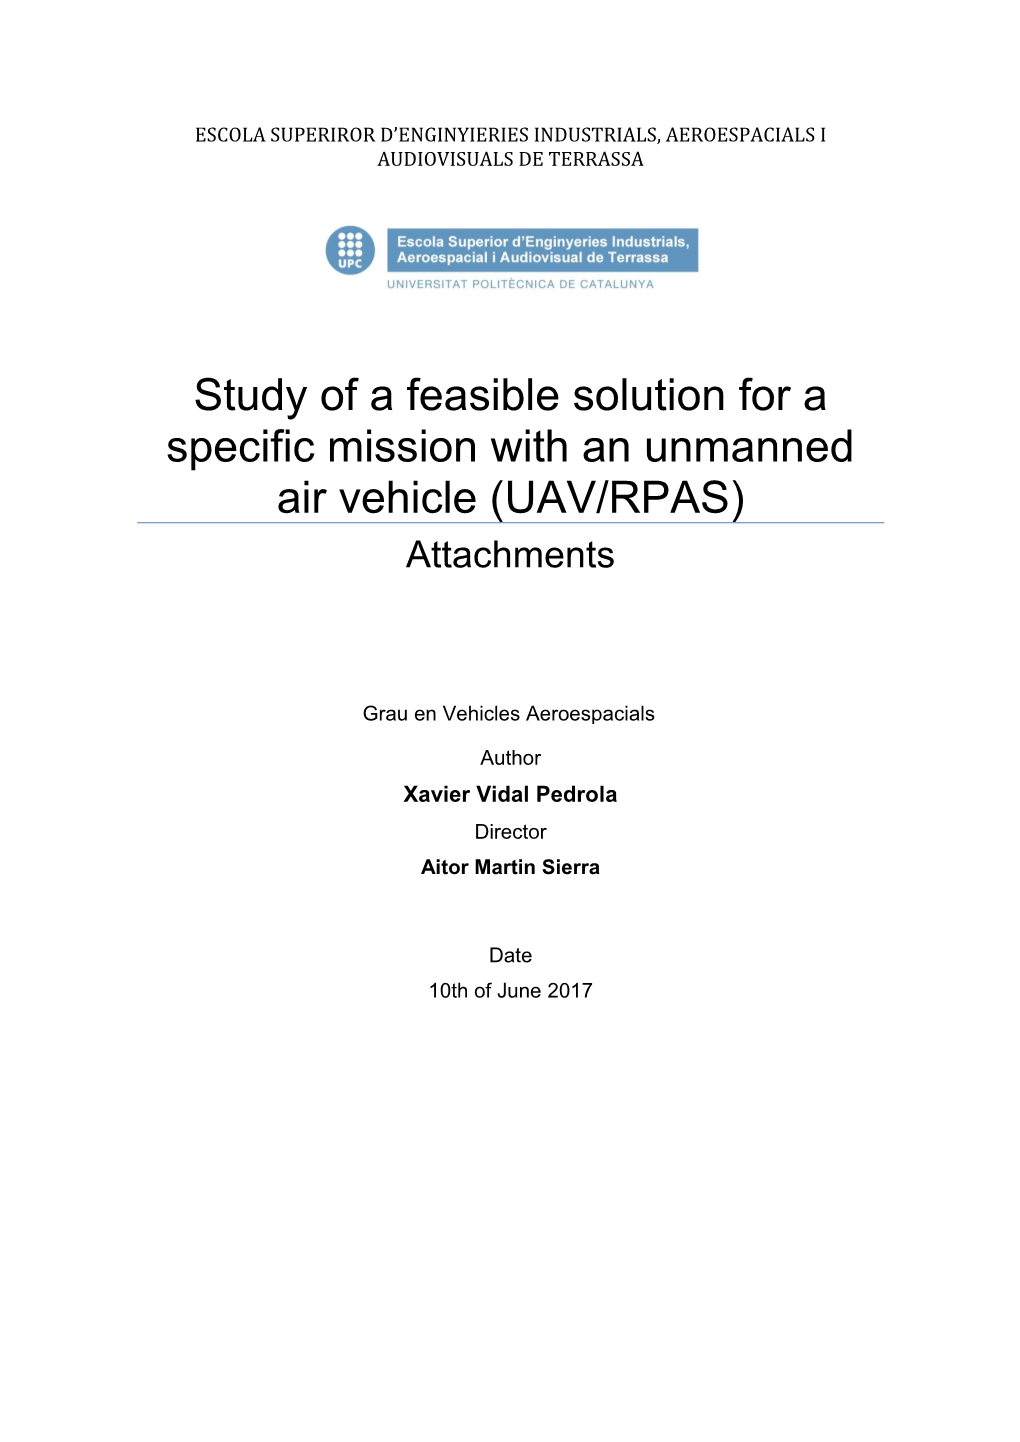 Study of a Feasible Solution for a Specific Mission with an Unmanned Air Vehicle (UAV/RPAS) Attachments